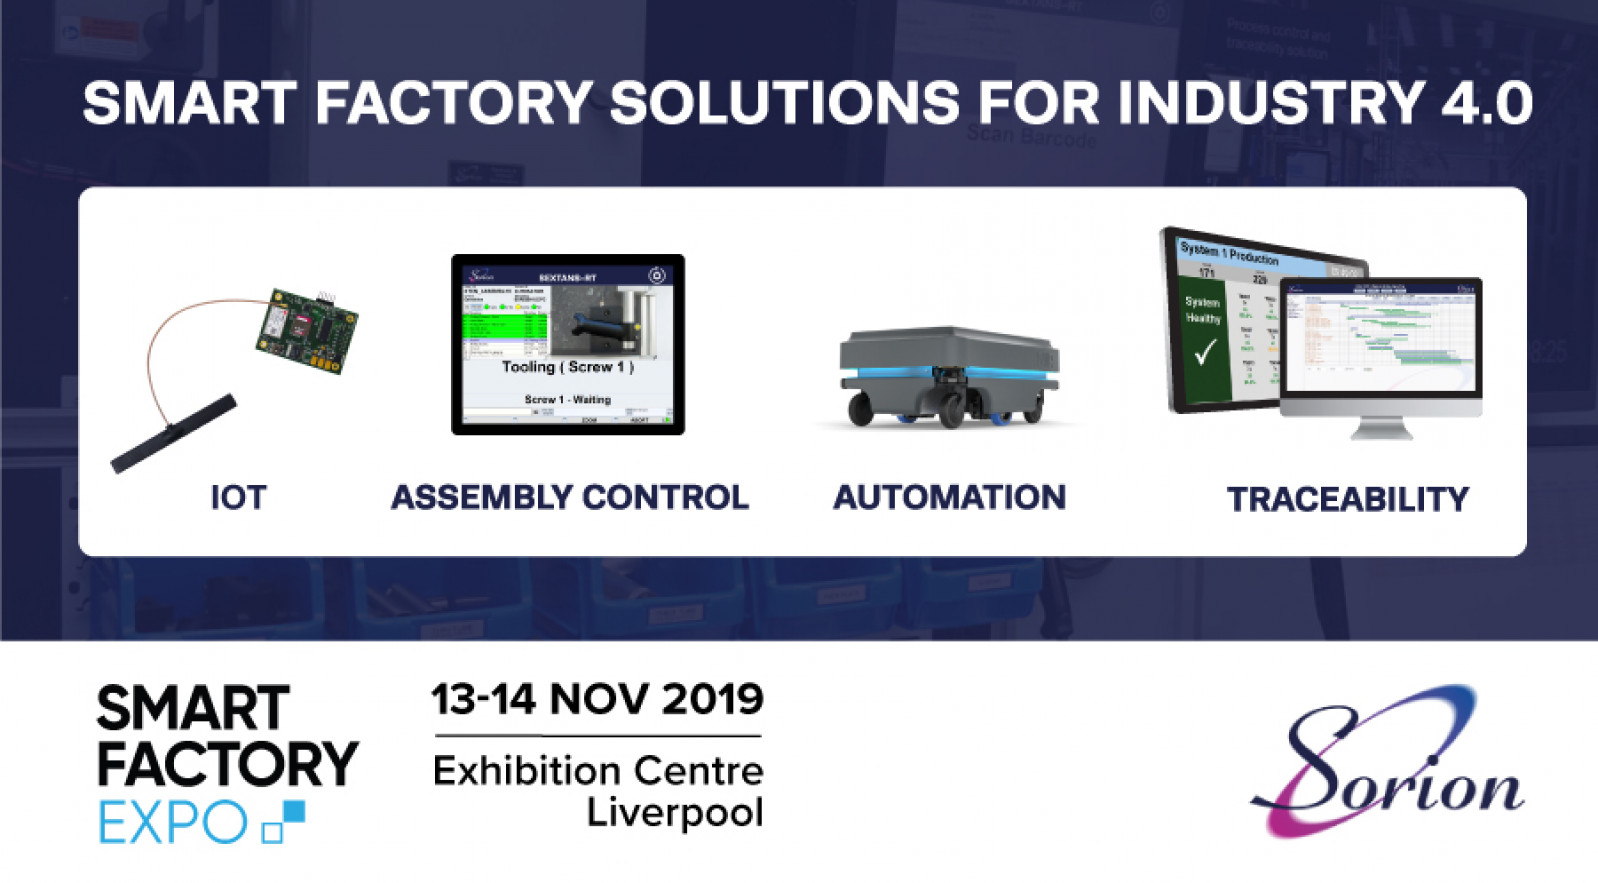 Sorion at Smart Factory Expo 2019